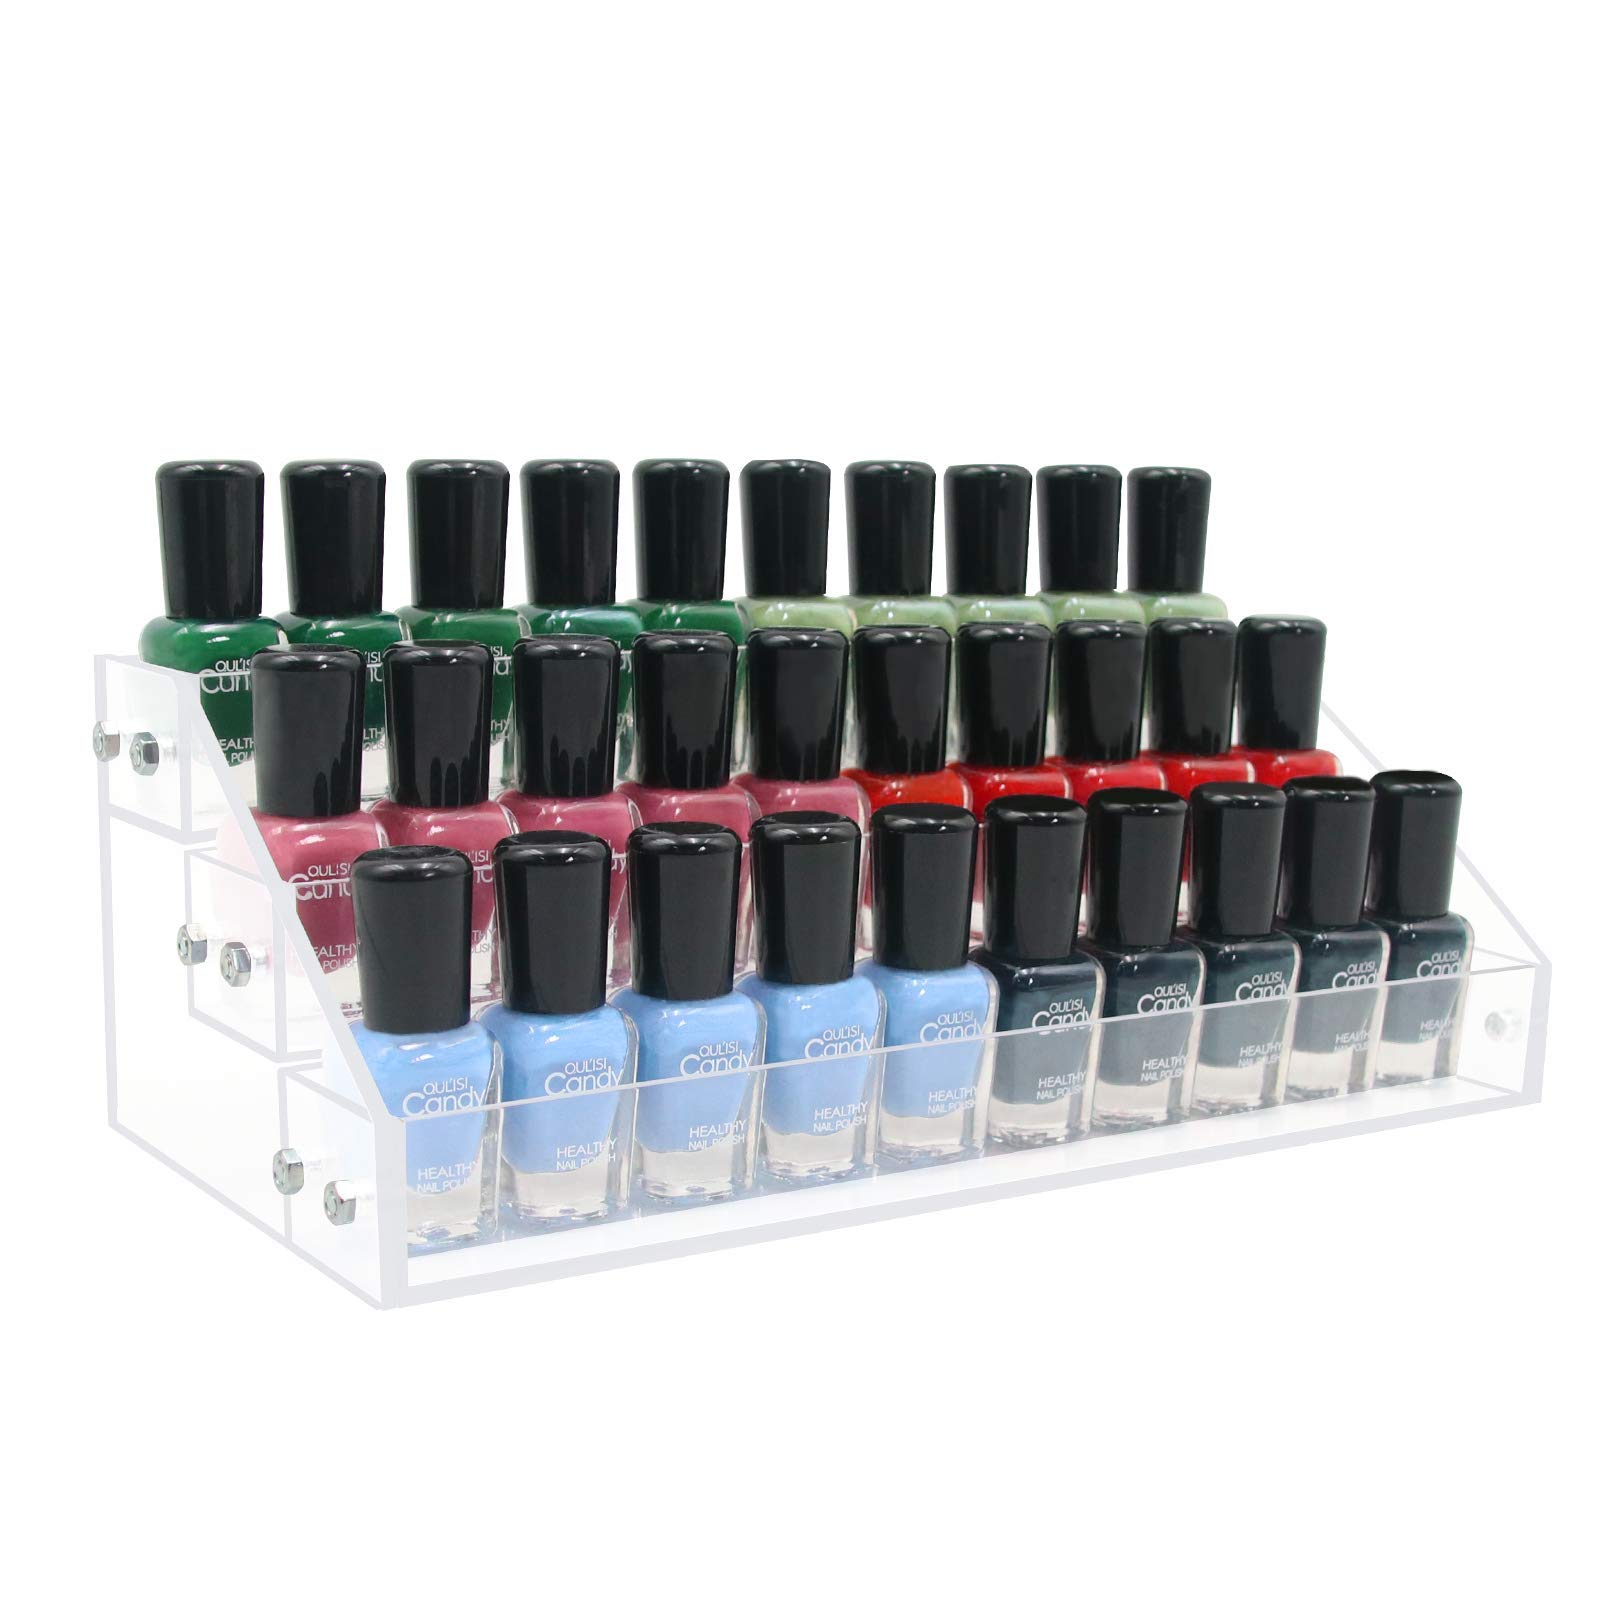 Amazon.com : Cq acrylic Clear Nail Polish Organizers And Storage,5 Layer Nail  Polish Rack Tabletop Display Stand Holds Up to 45 Bottles, Acrylic 5 Tier  Essential Oils Holder For Professional Nail Salon :